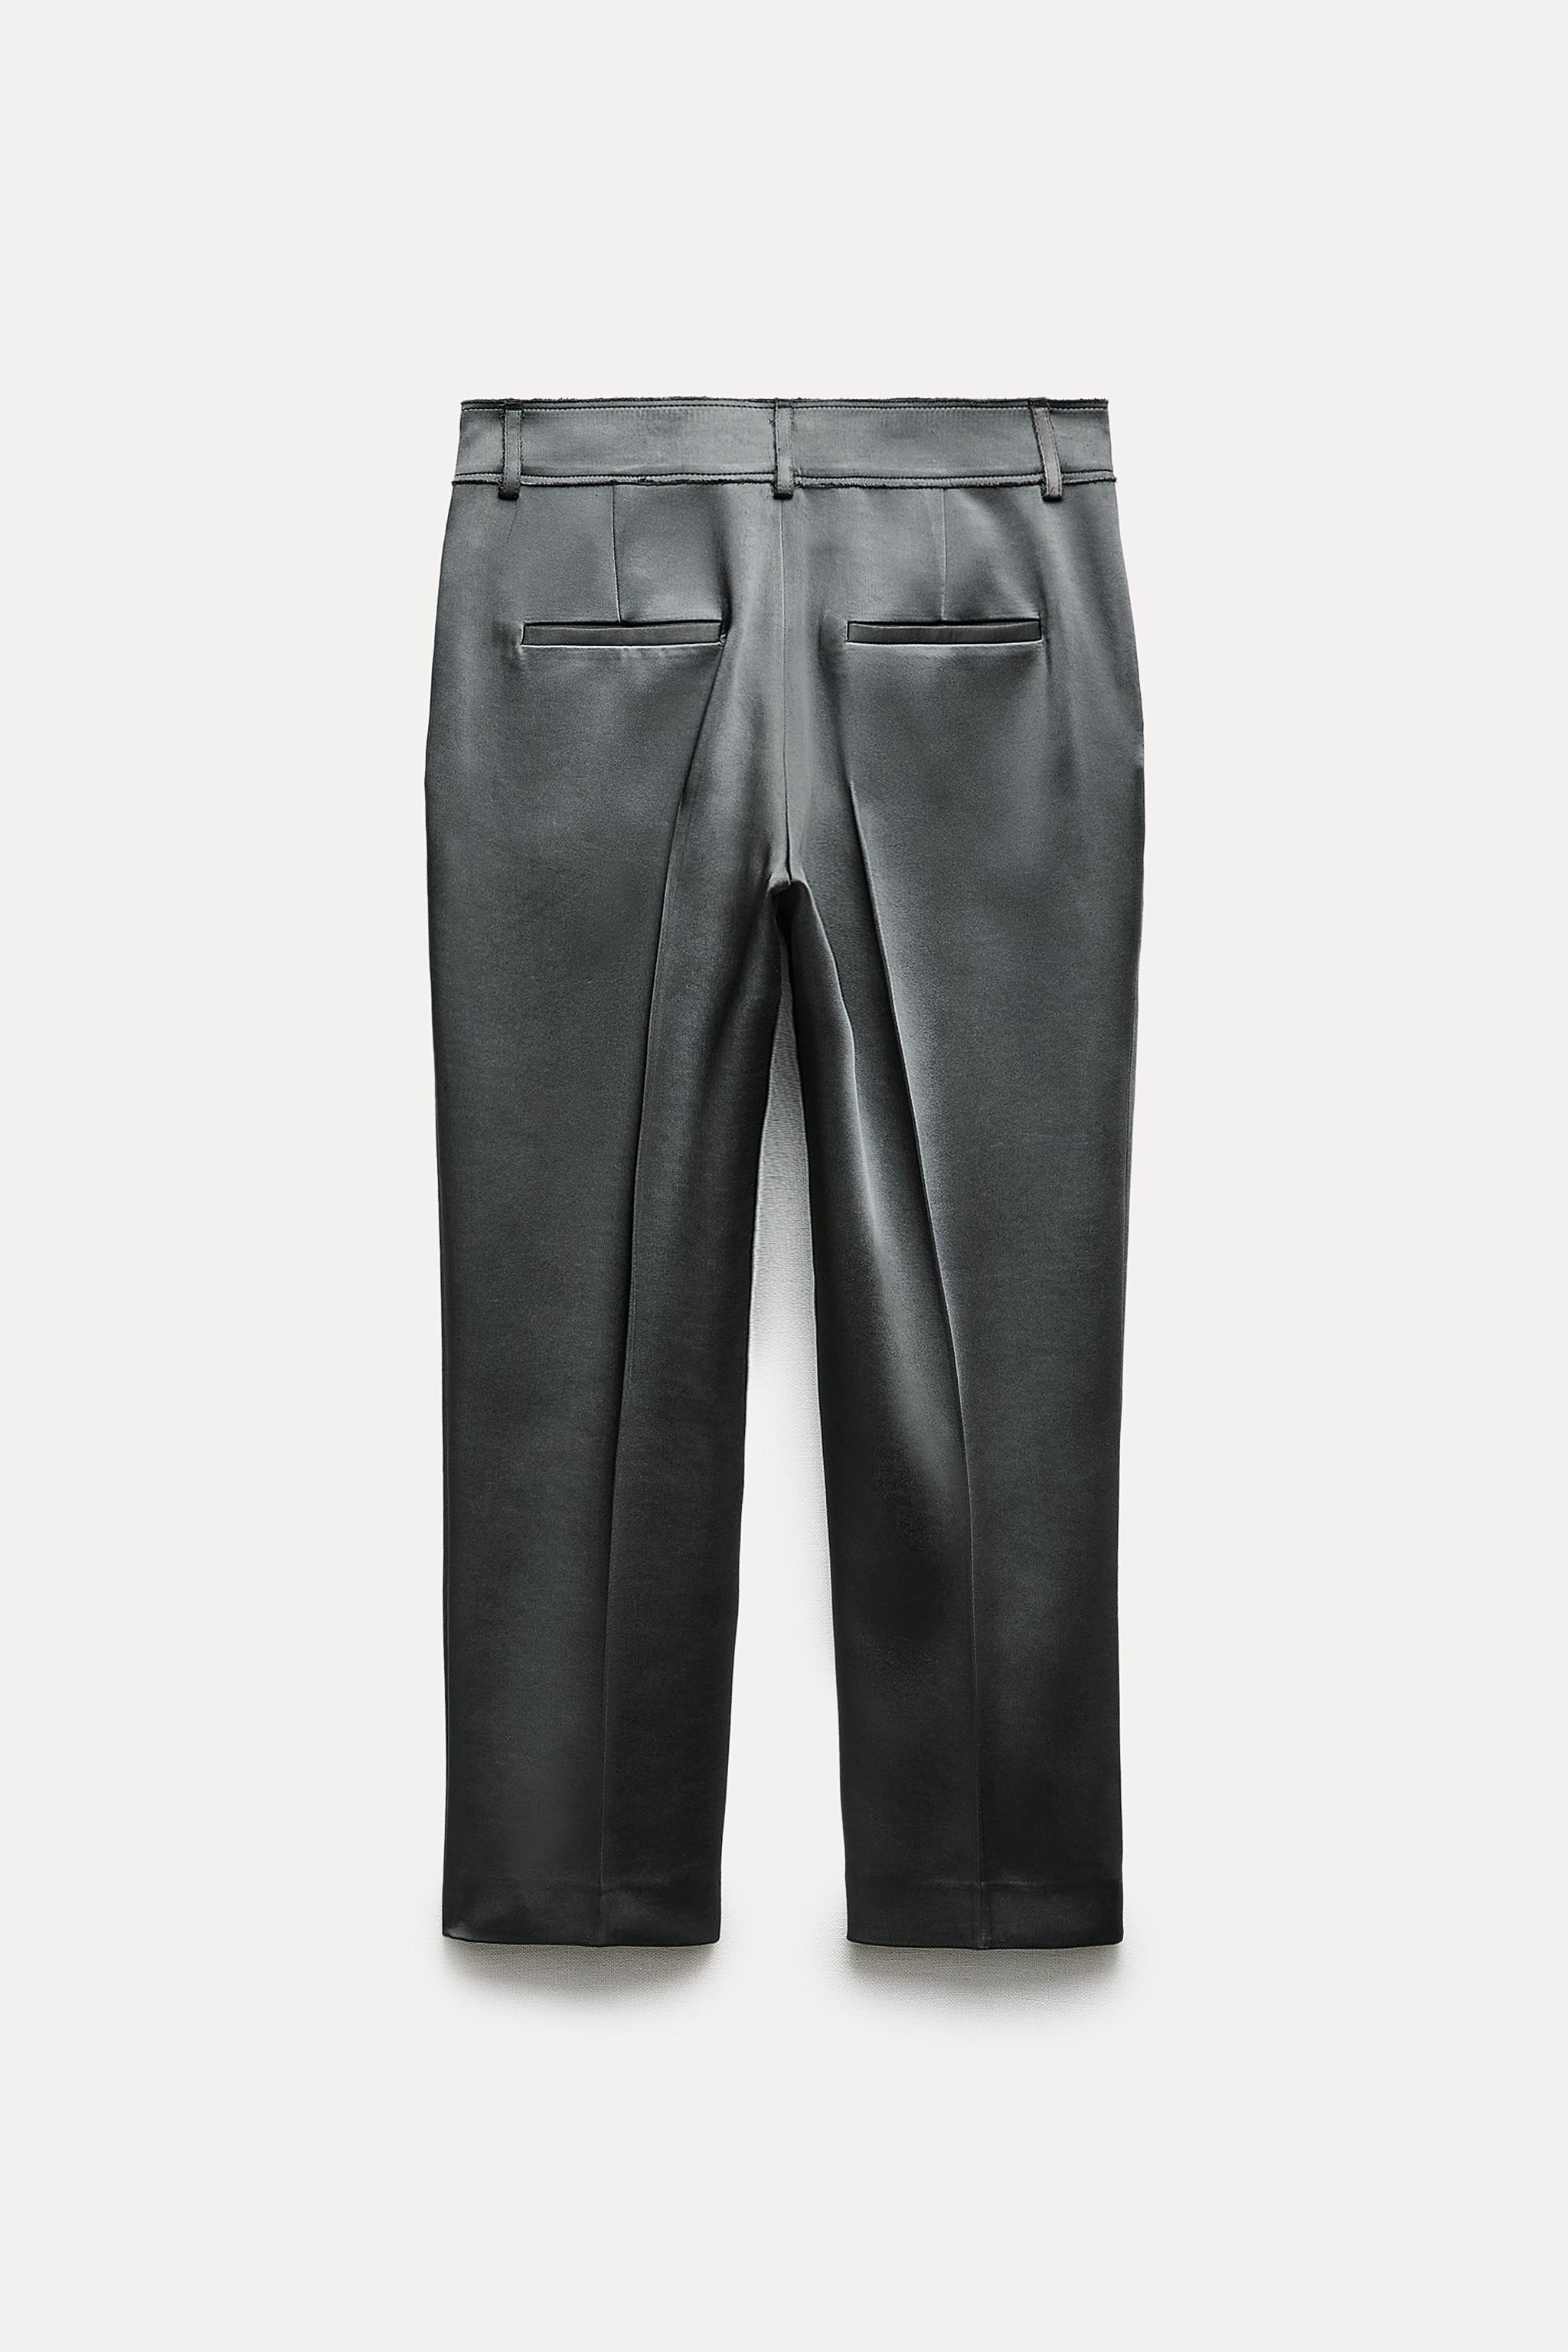 HEAVYWEIGHT SATIN PANTS ZW COLLECTION - Anthracite grey